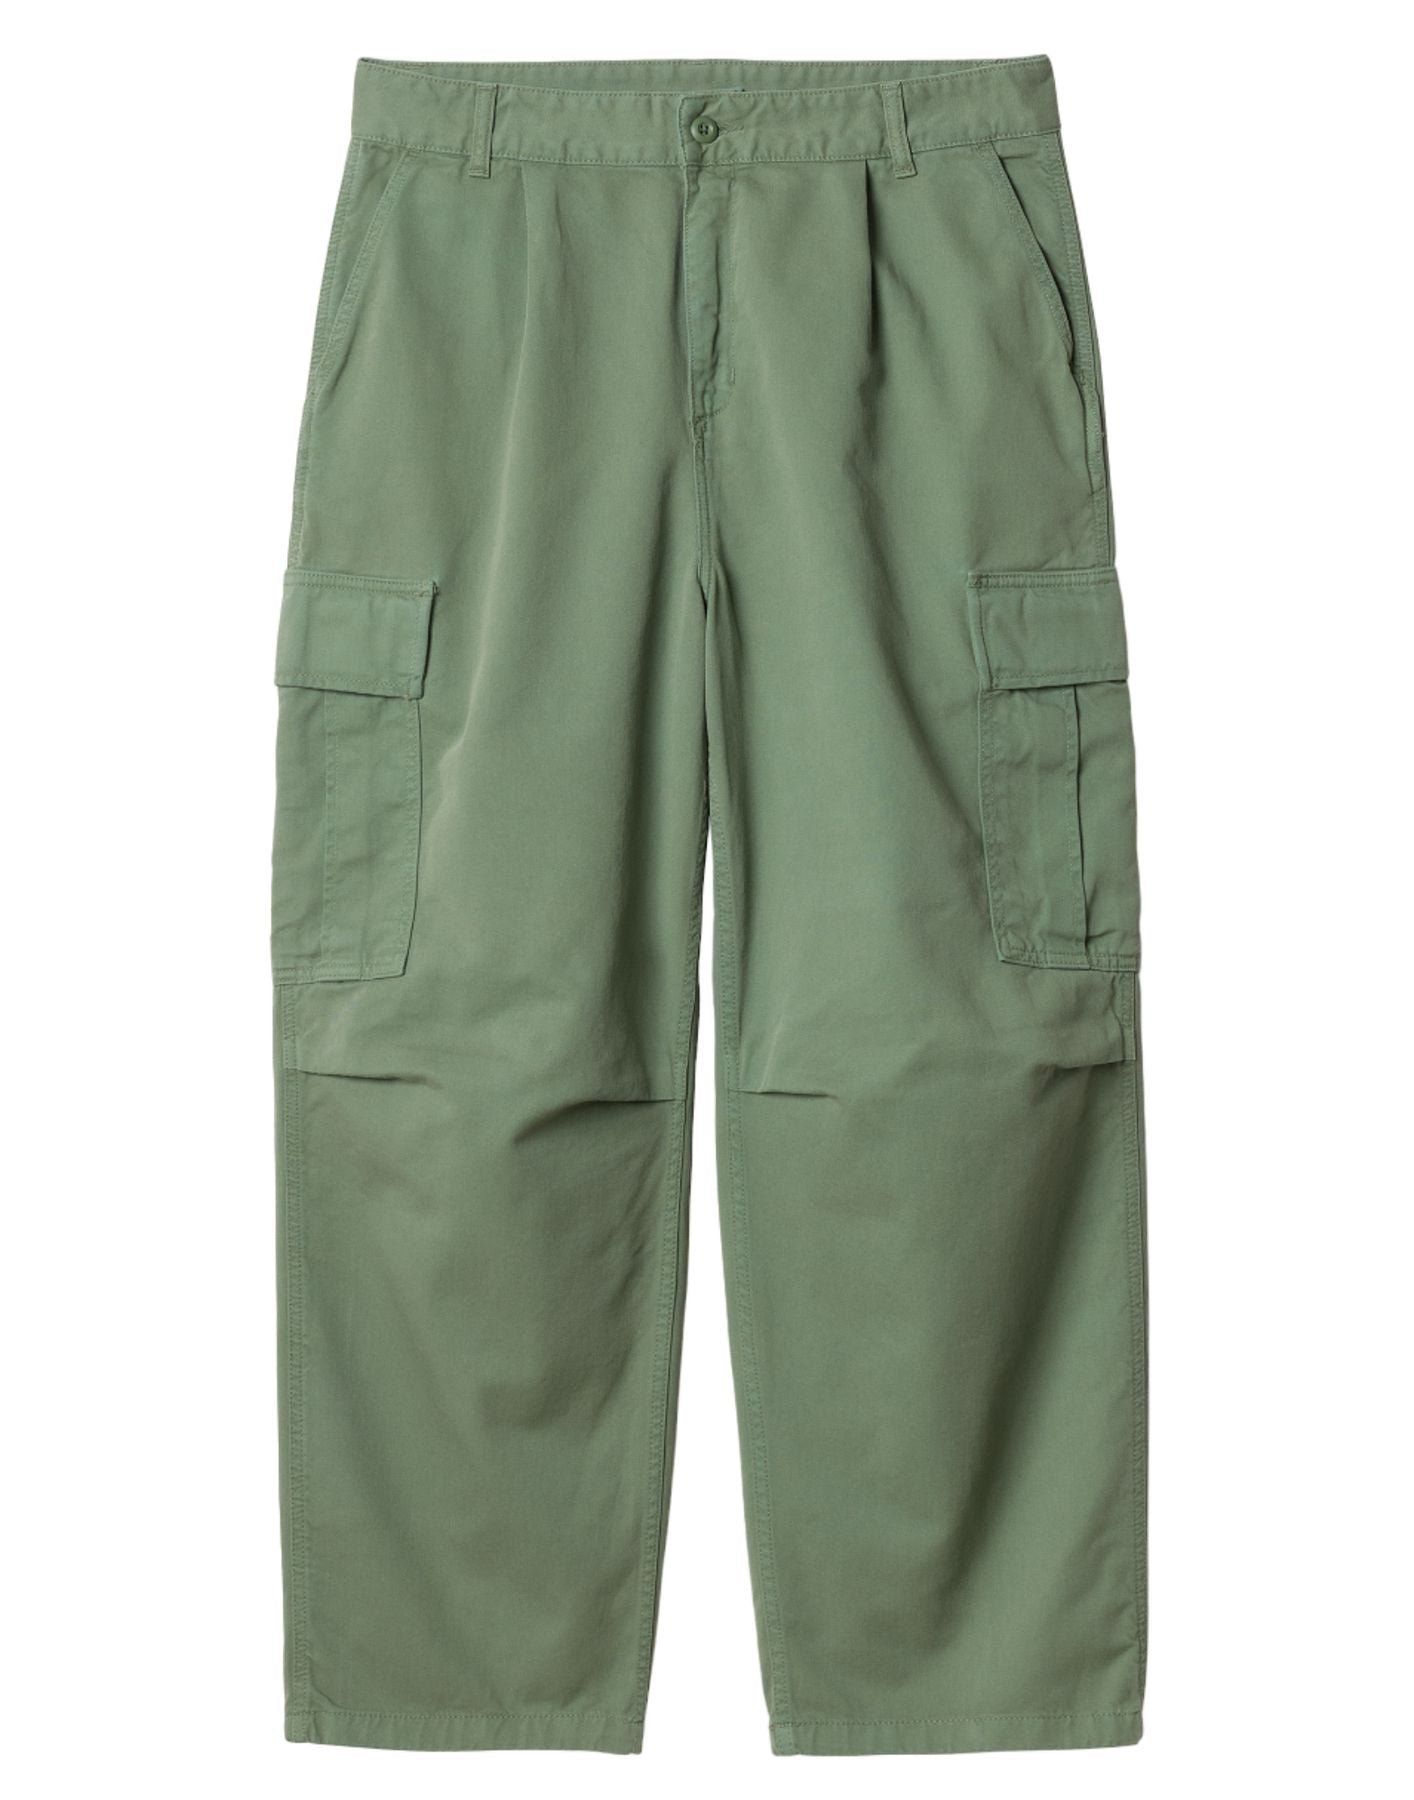 Pantalon pour homme I031218 29NGD DUCK GREEN CARHARTT WIP